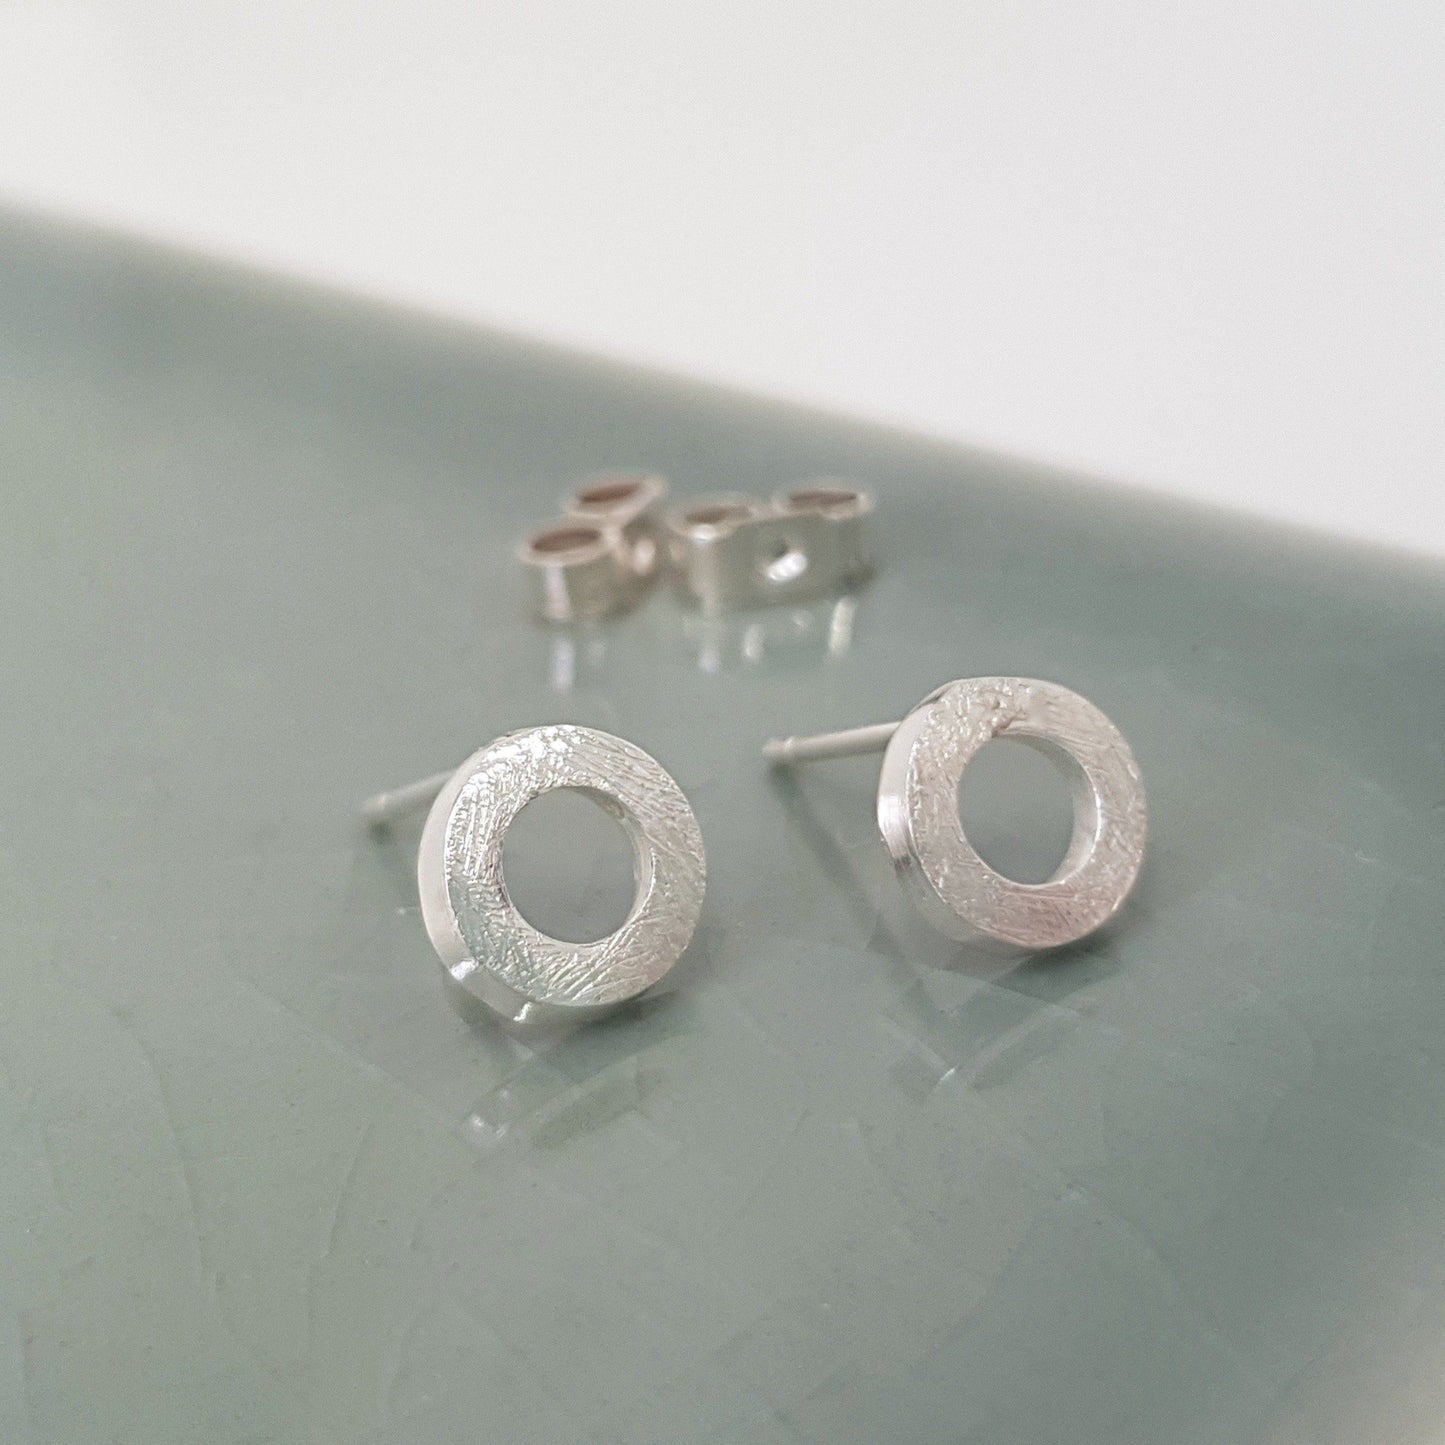 Silver Small Link Studs Earrings Handmade by Anna Calvert Jewellery in the UK